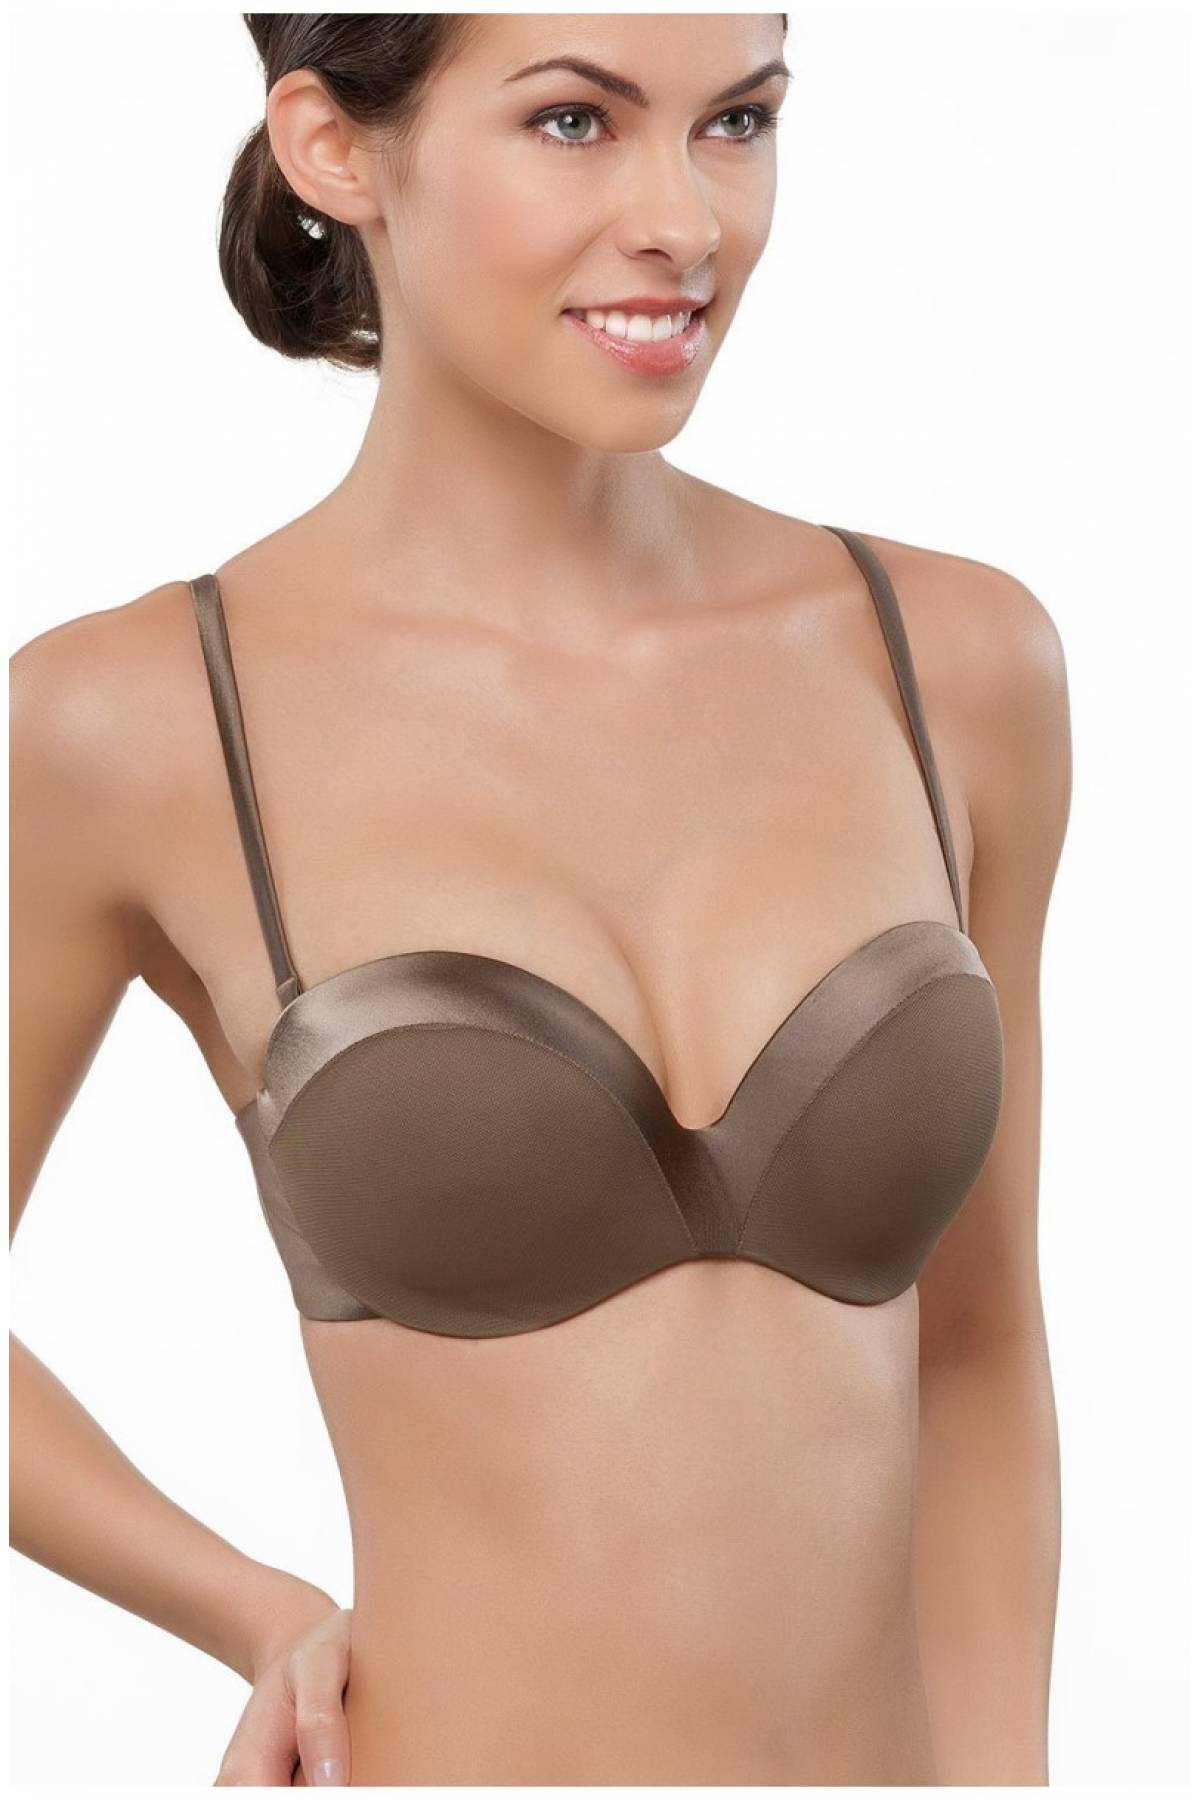  CASOLACE Women's Smoothing Plus Size Unlined Underwire Bandeau Strapless  Bra Sand Dollar 30D : Clothing, Shoes & Jewelry